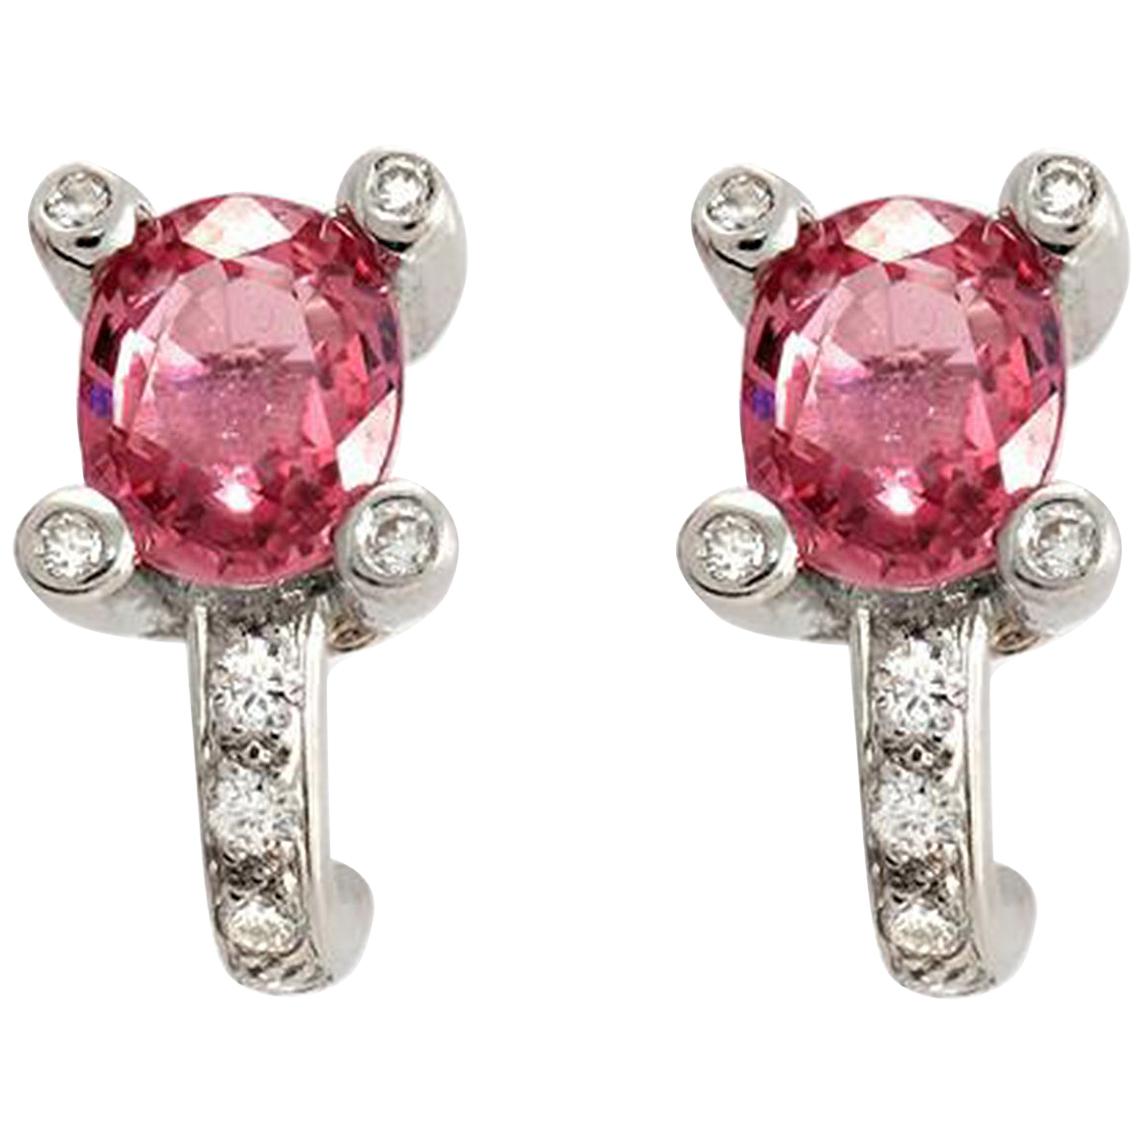 1.86 CT Natural Pink Sapphire & 0.39 CT Diamonds in 18K White Gold Stud Earrings For Sale